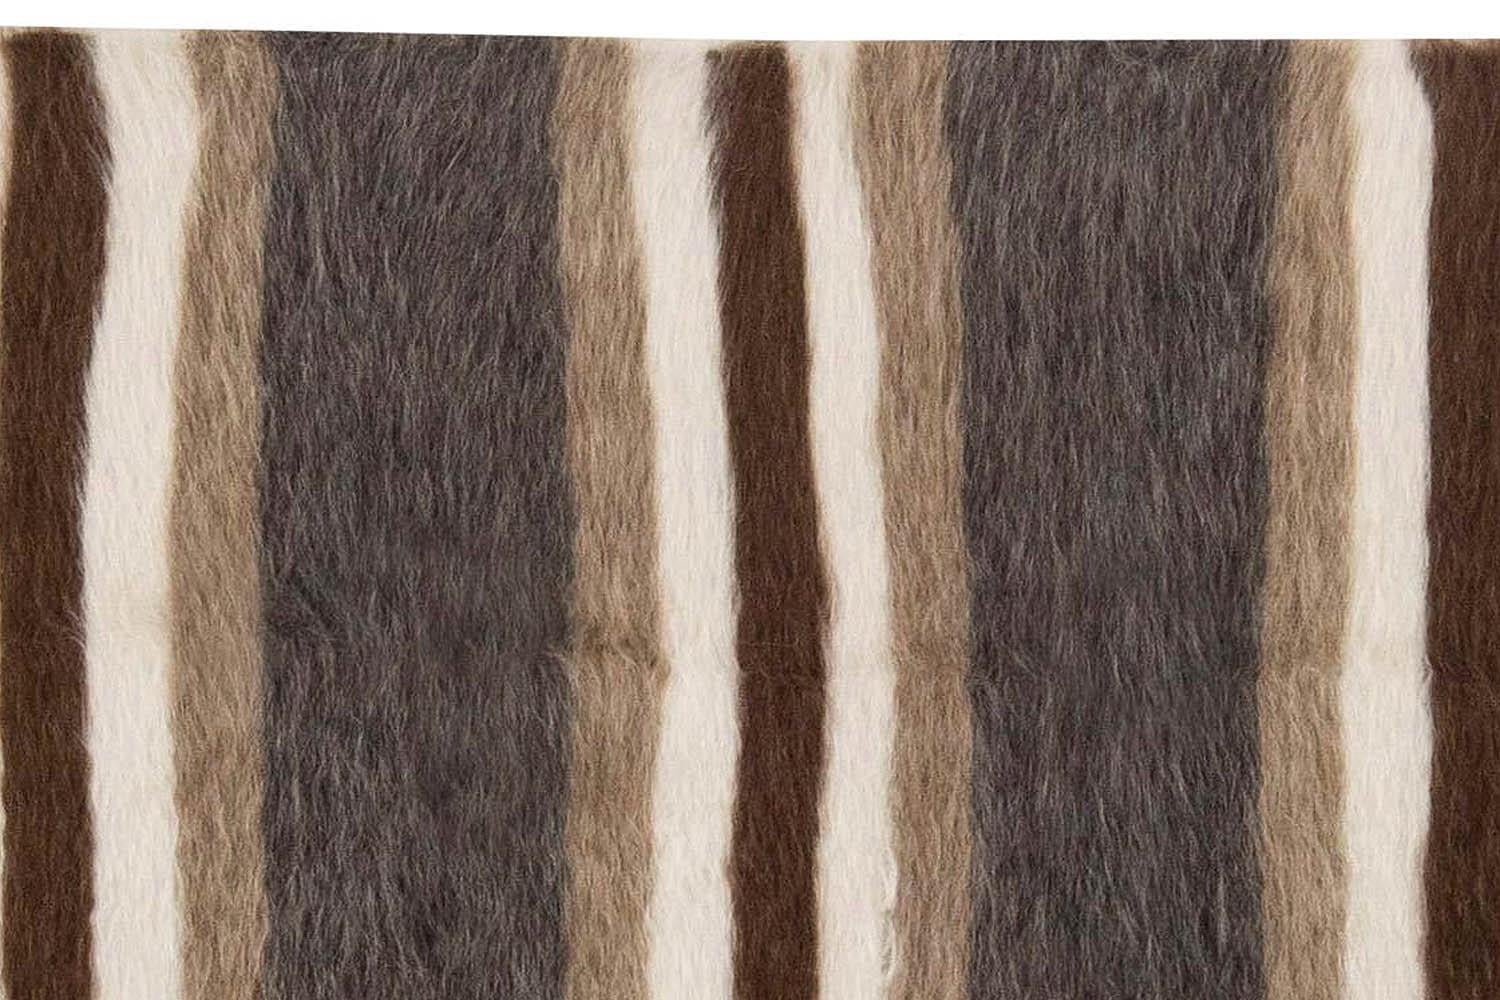 Taurus Collection Striped Brown, White, Grey, Goat Hair Rug by Doris Leslie Blau In New Condition For Sale In New York, NY